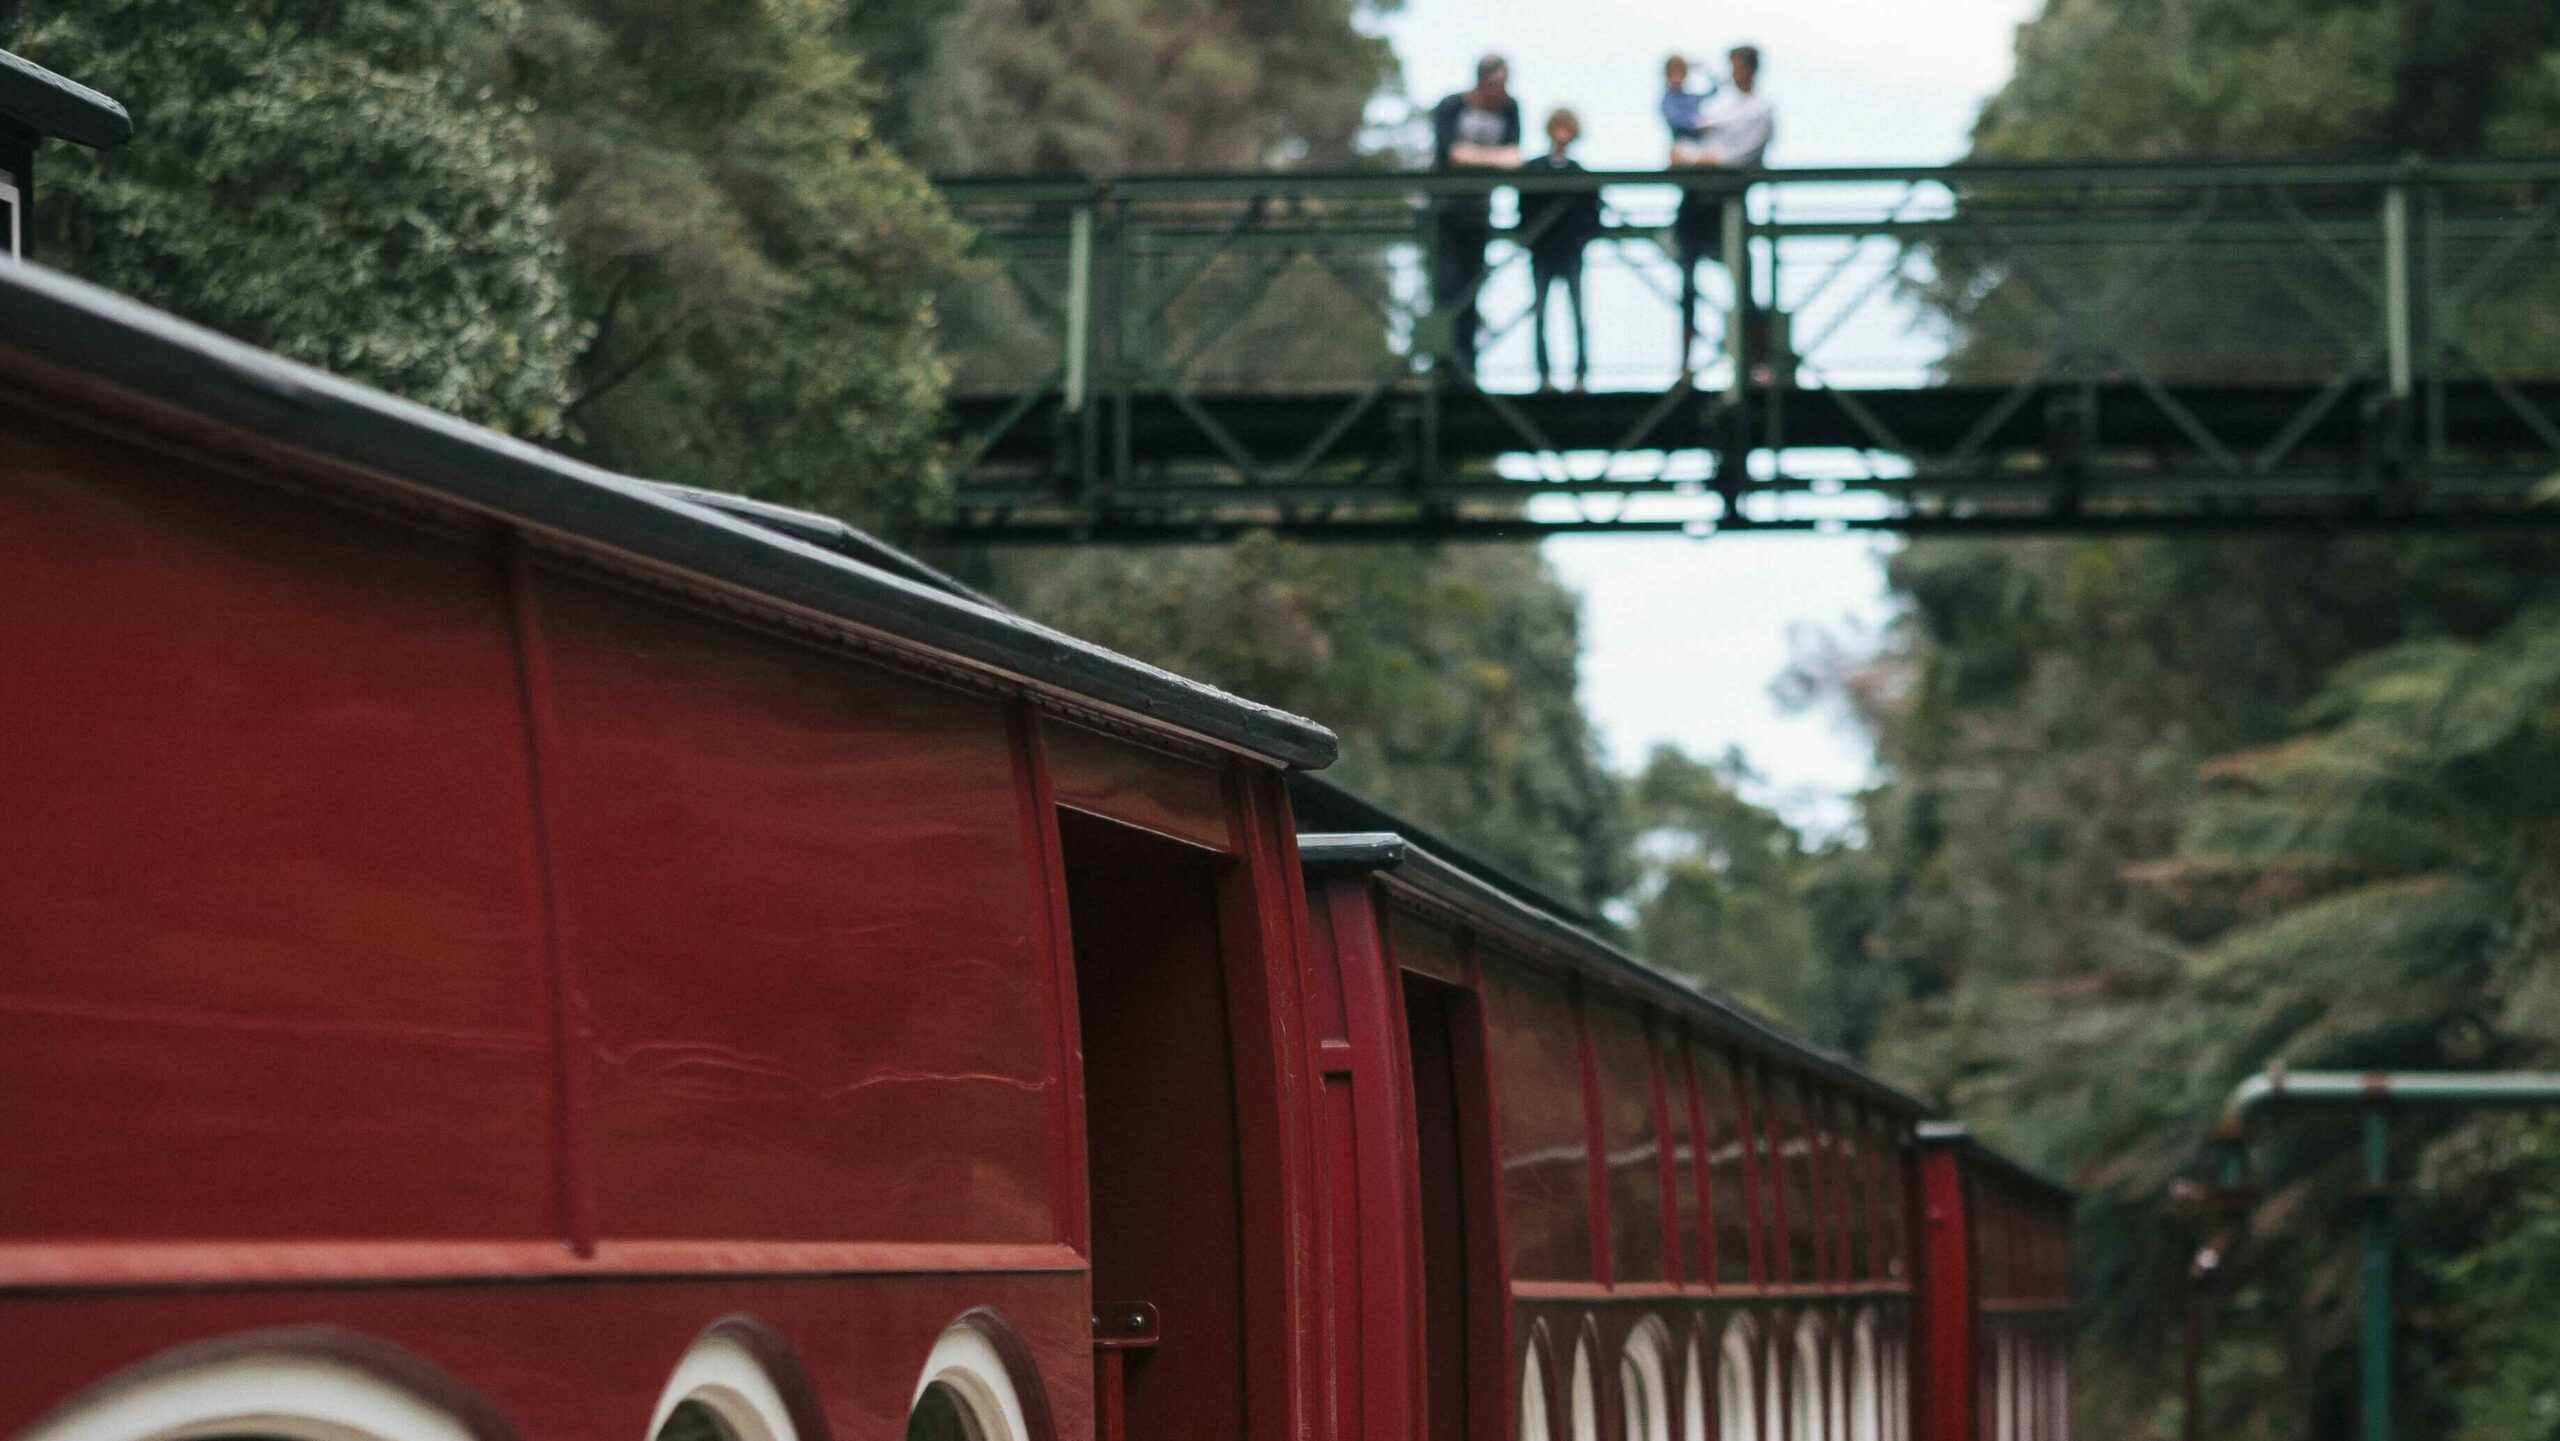 A family of four stand on a footbridge that runs along the top of the railway line. They gaze down at the train and three maroon carriages with a dark green strip down the side. The train sits alongside of the train platform.